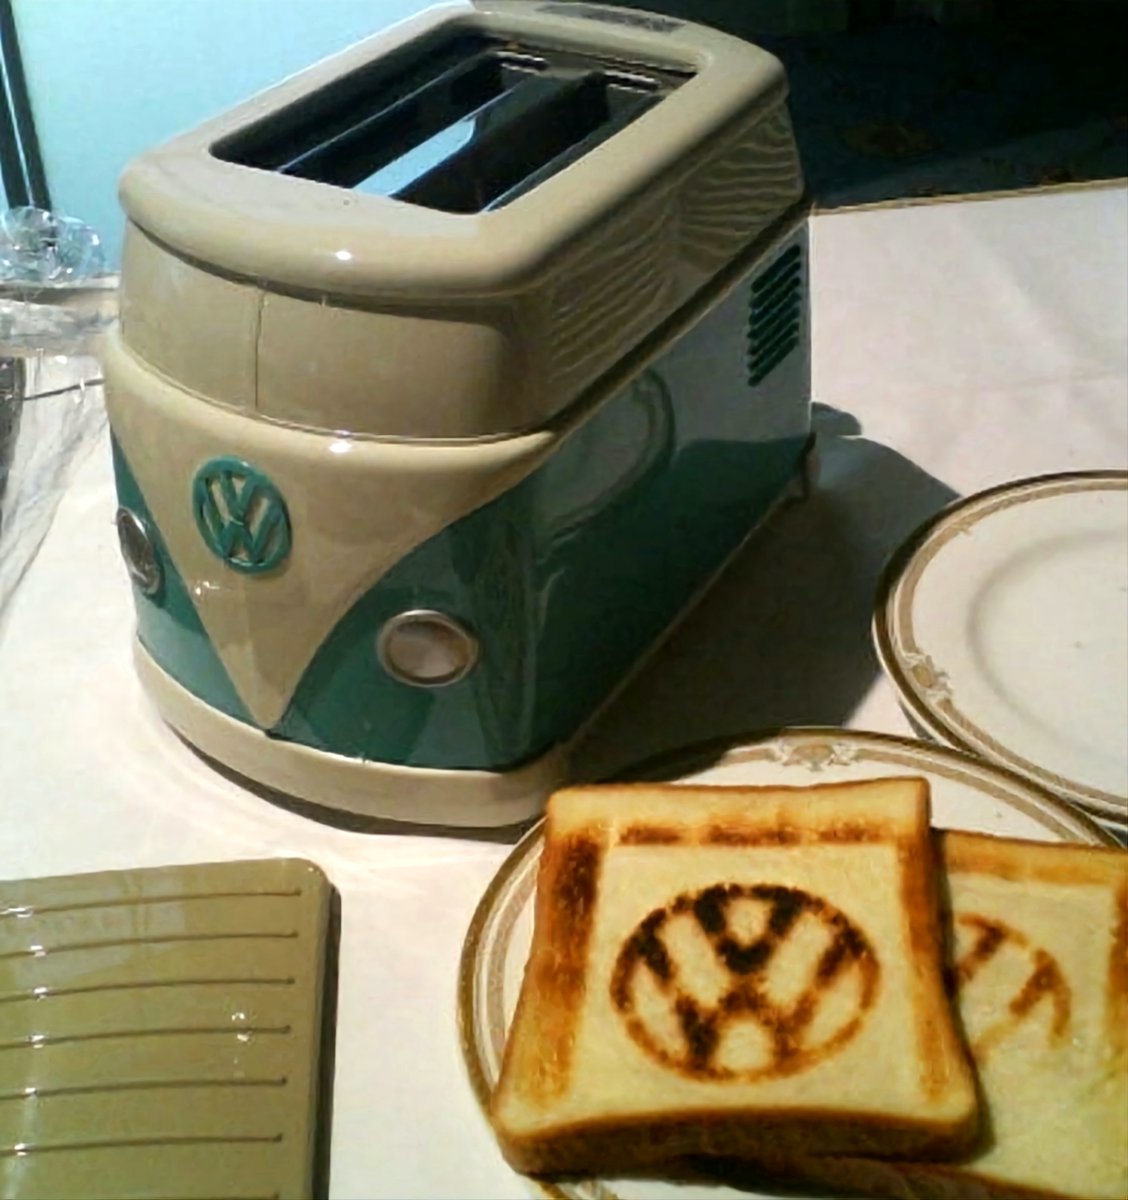 This #VWBus toaster is the best thing since sliced bread! 🍞🔥 #BreakfastOnWheels